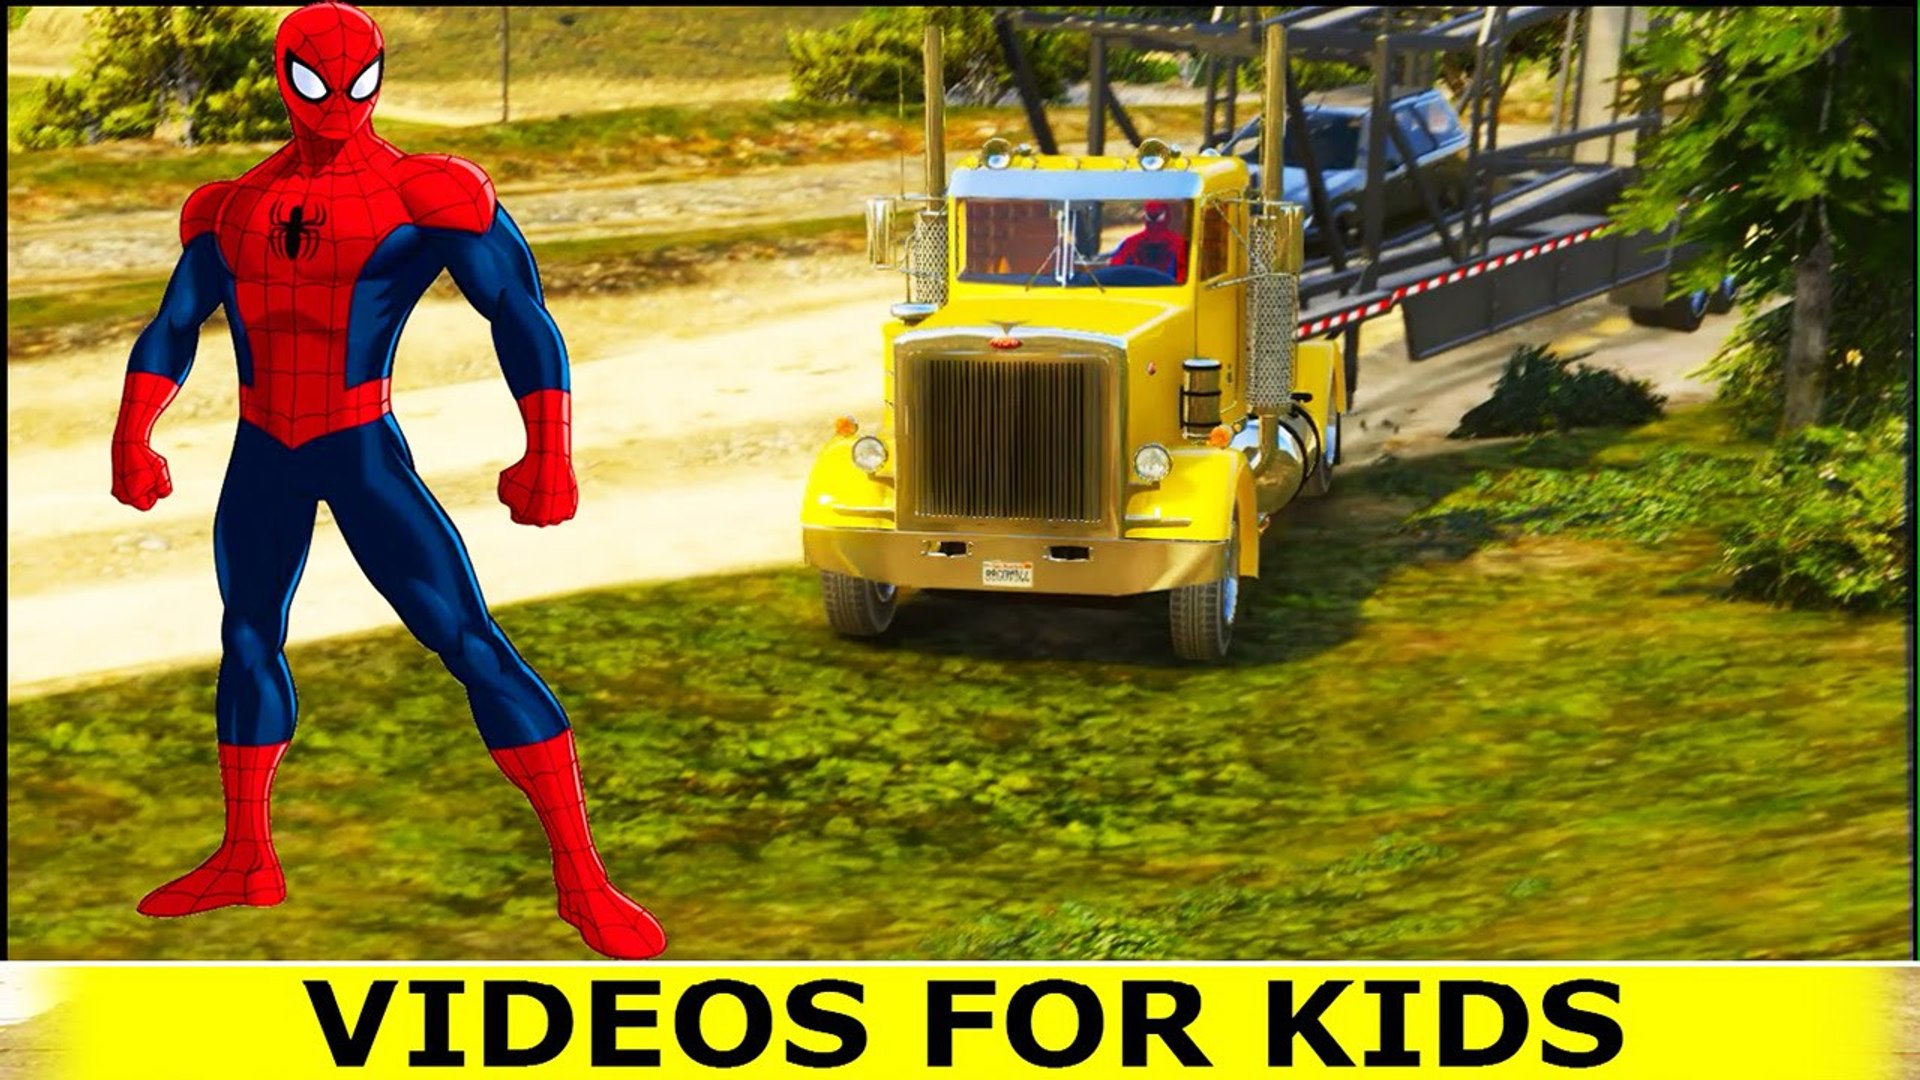 CAR CARRIER TRUCK with Spiderman Cartoon for Kids and Nursery Rhymes Songs  for Children - video Dailymotion